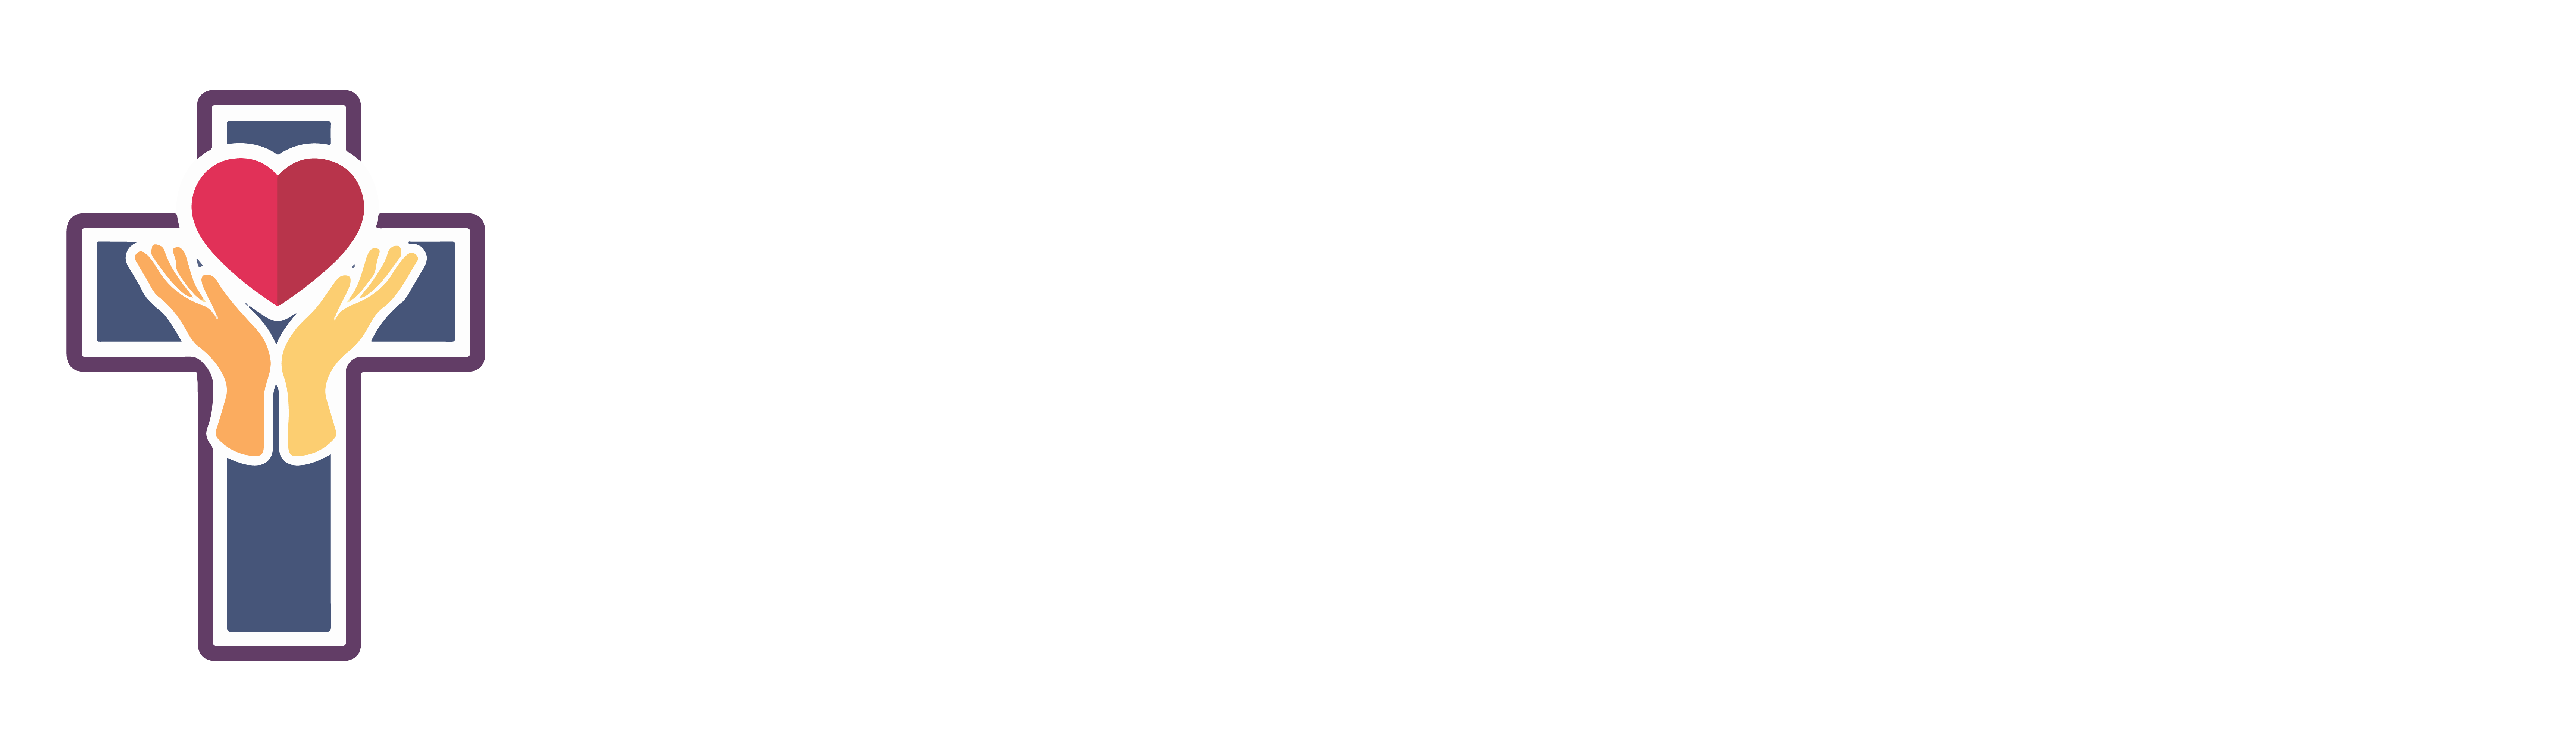 Heart and Hands Ministries